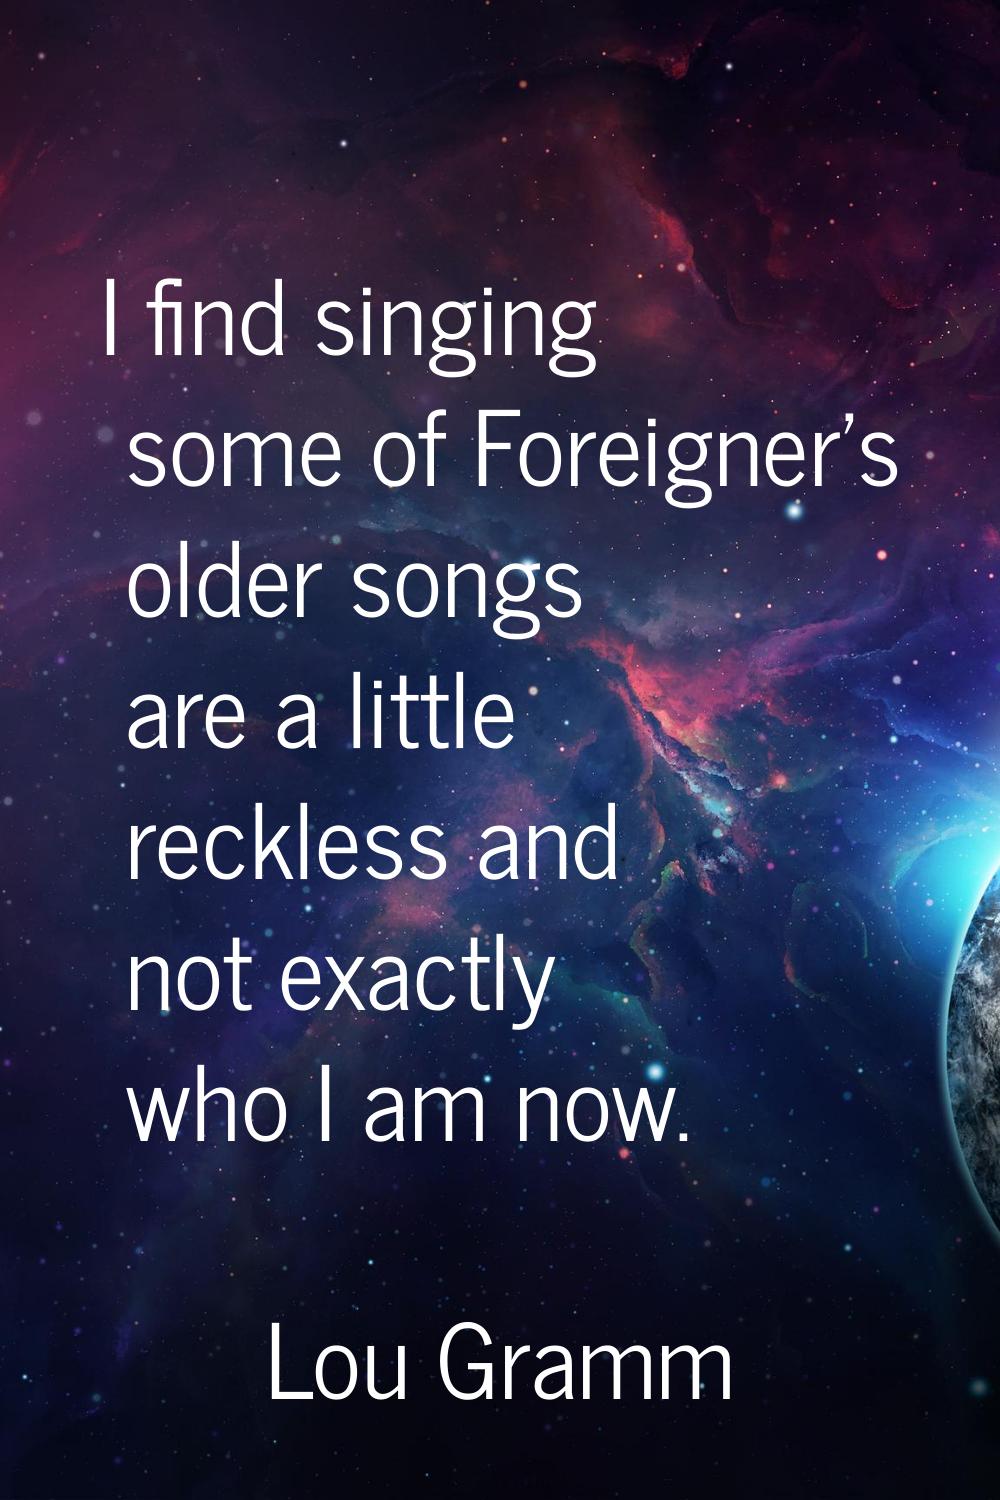 I find singing some of Foreigner's older songs are a little reckless and not exactly who I am now.